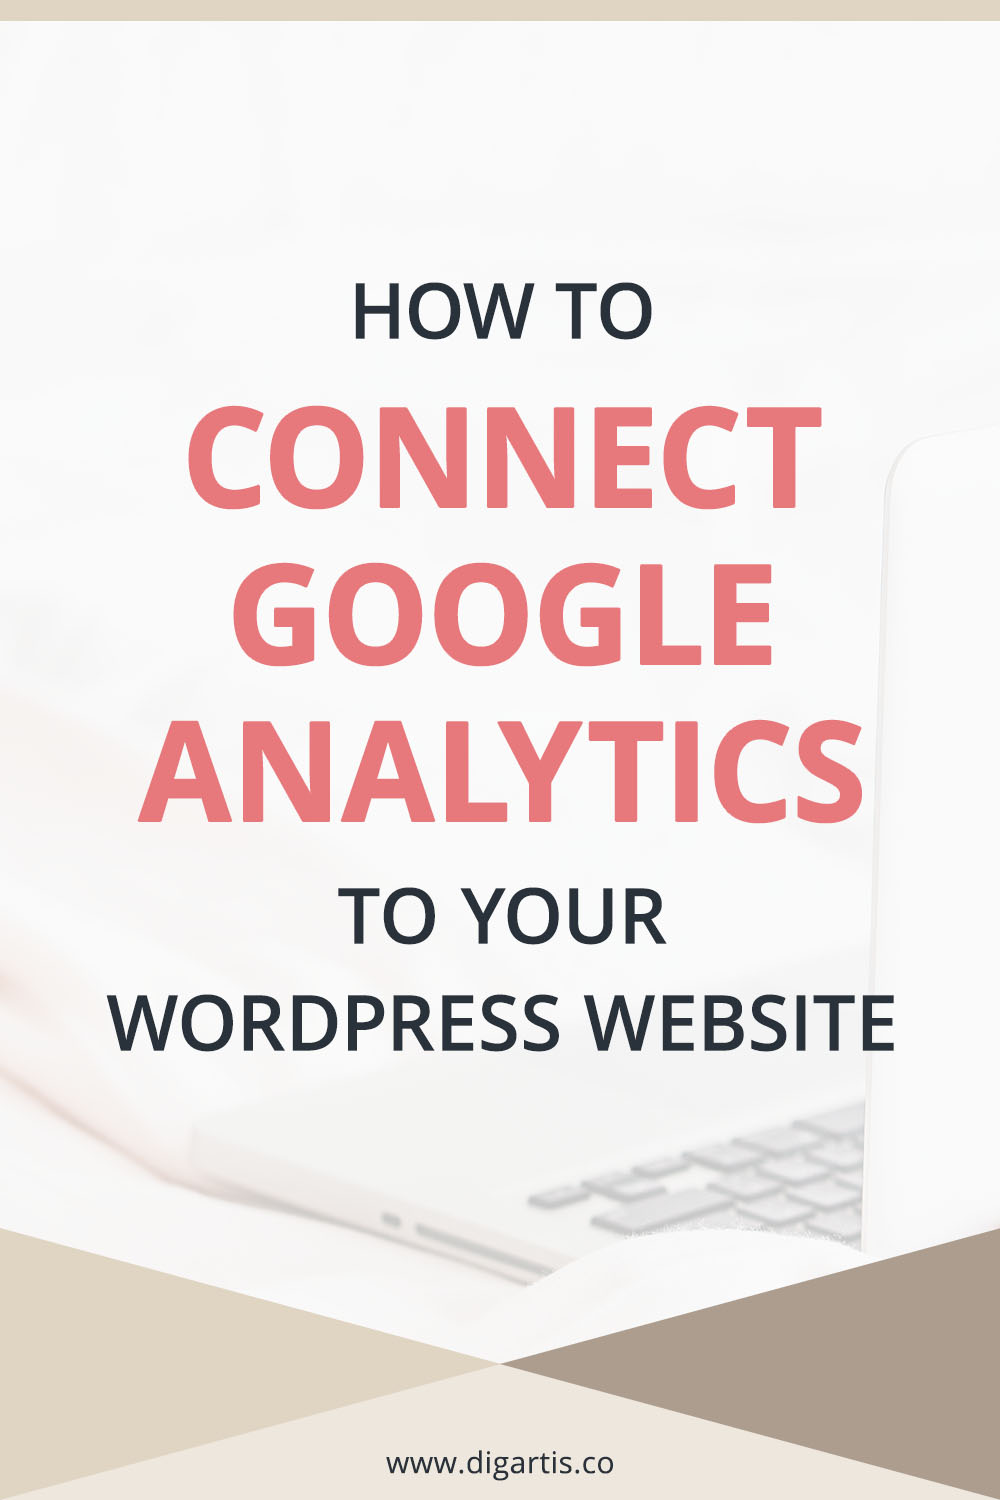 How to connect Google Analytics to your WordPress website